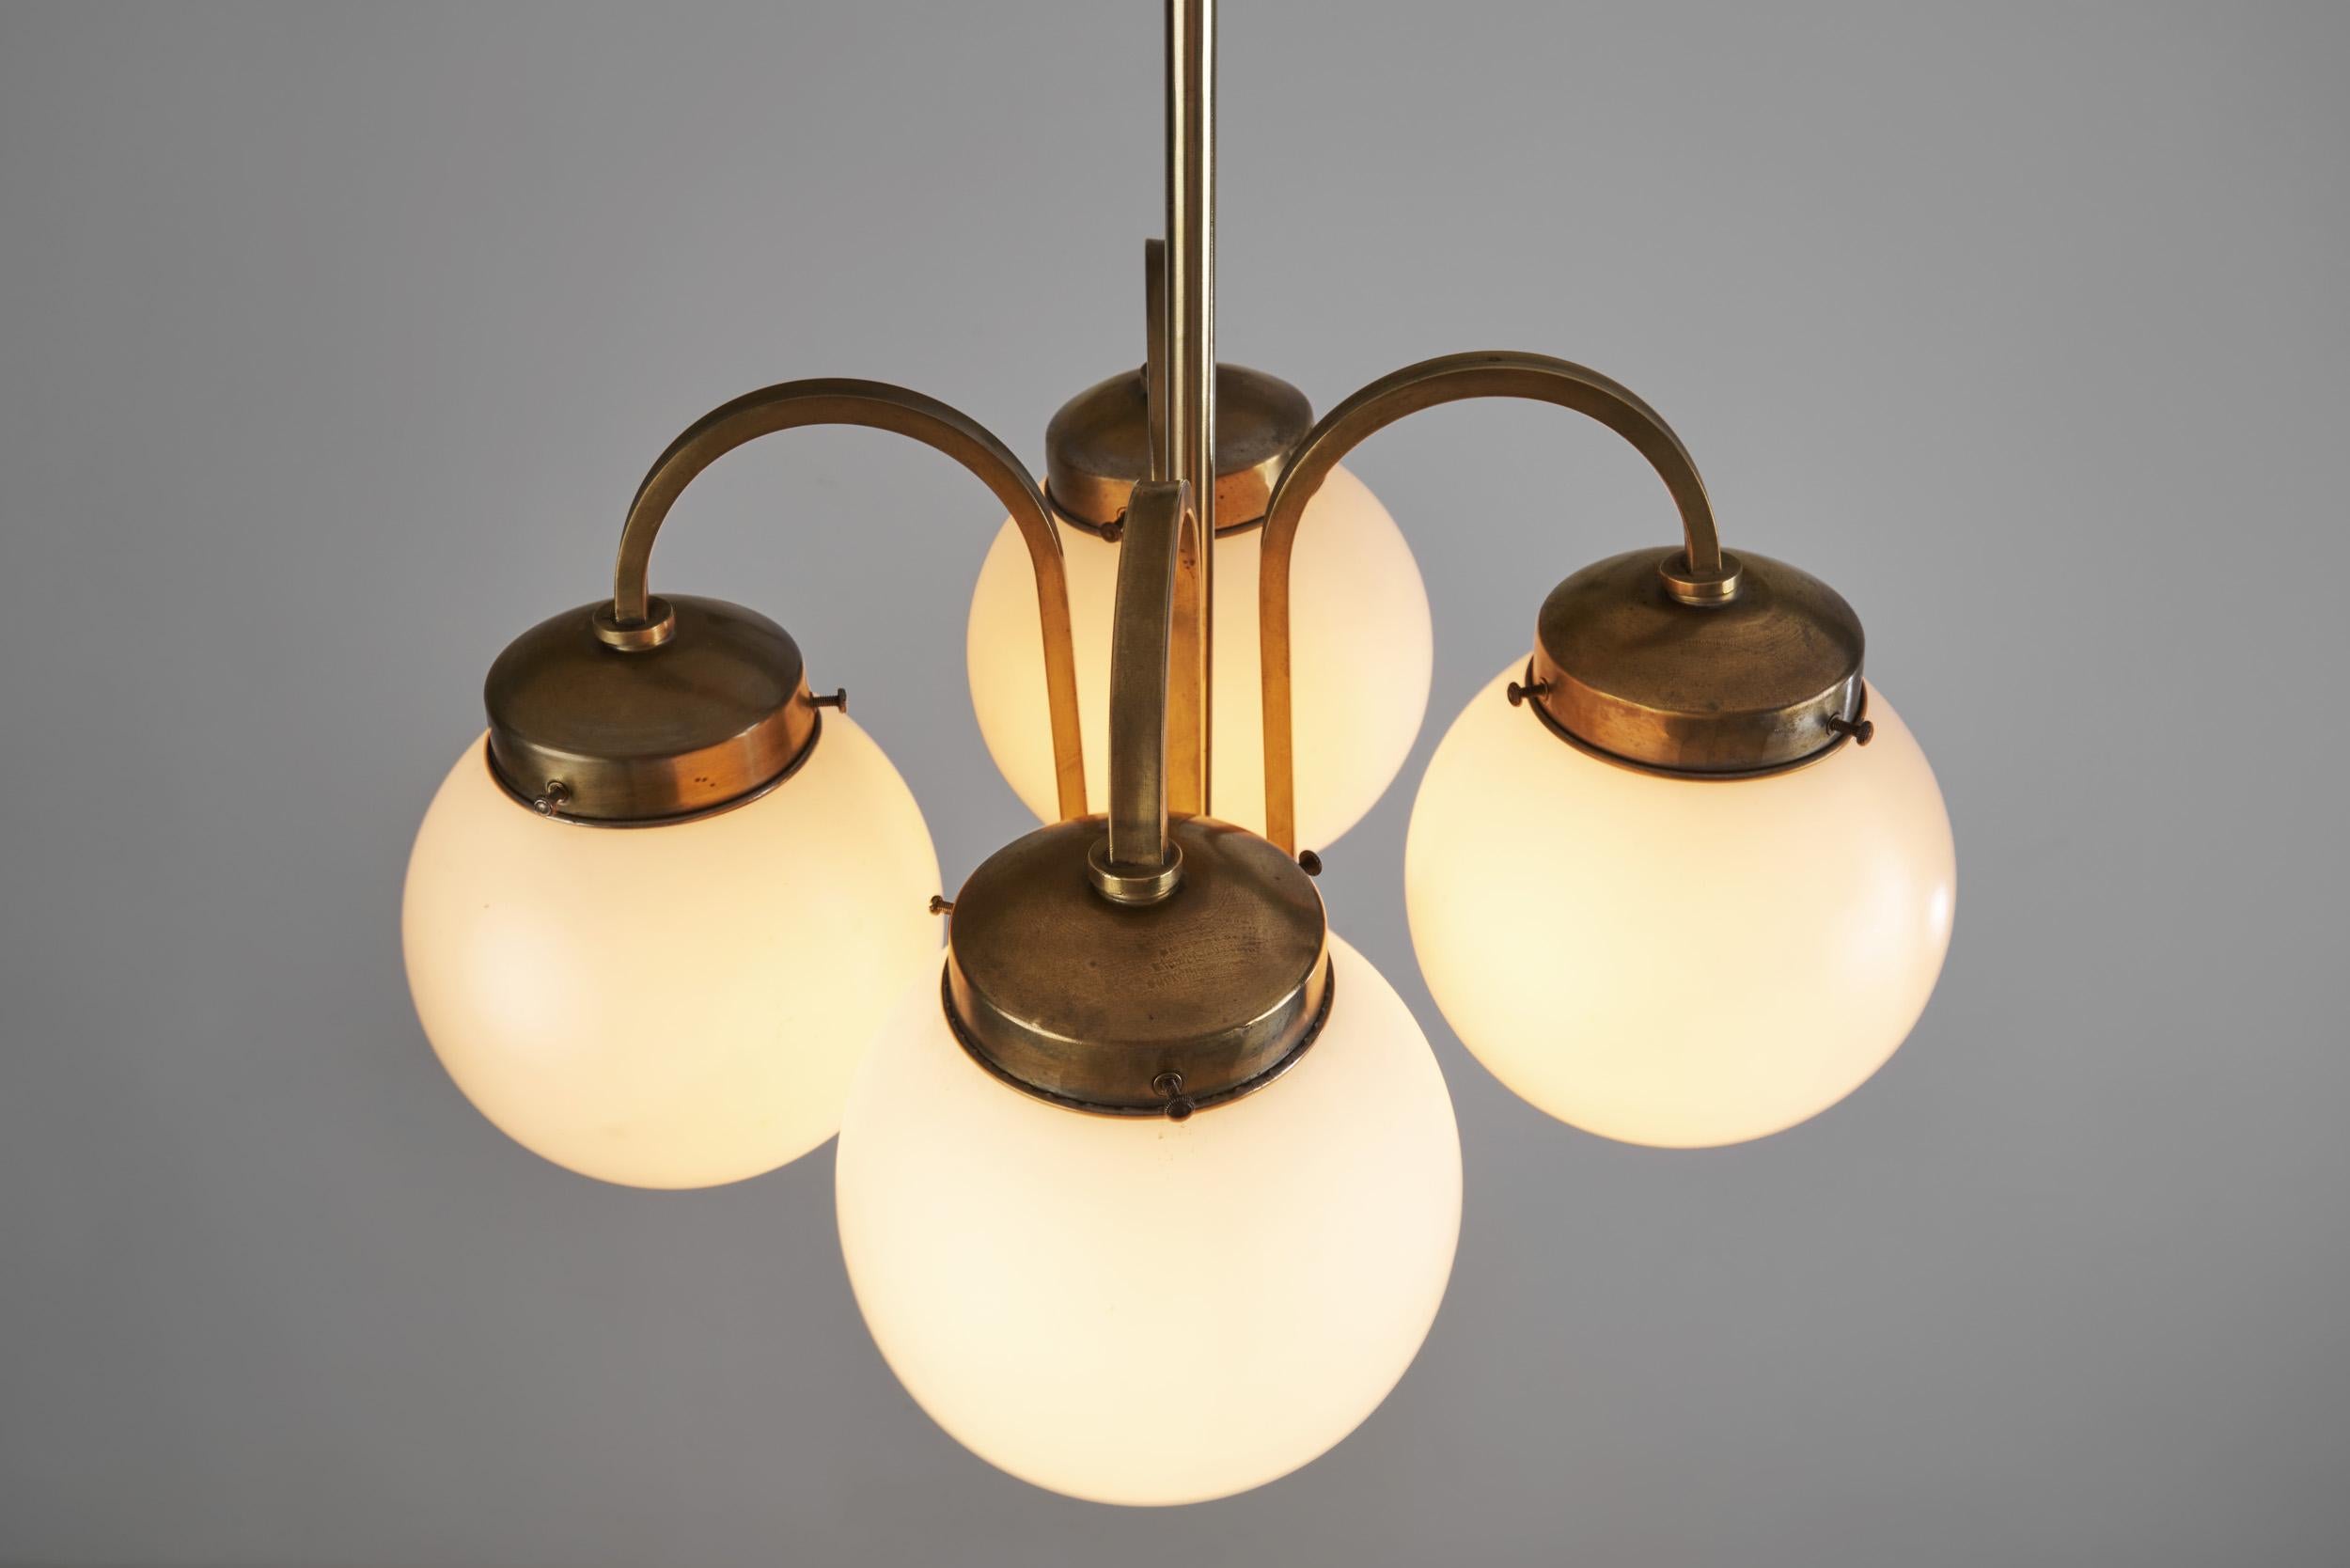 Aluminum Curved Ceiling Lamp with Four Opal Glass Shades, Europe 1940s For Sale